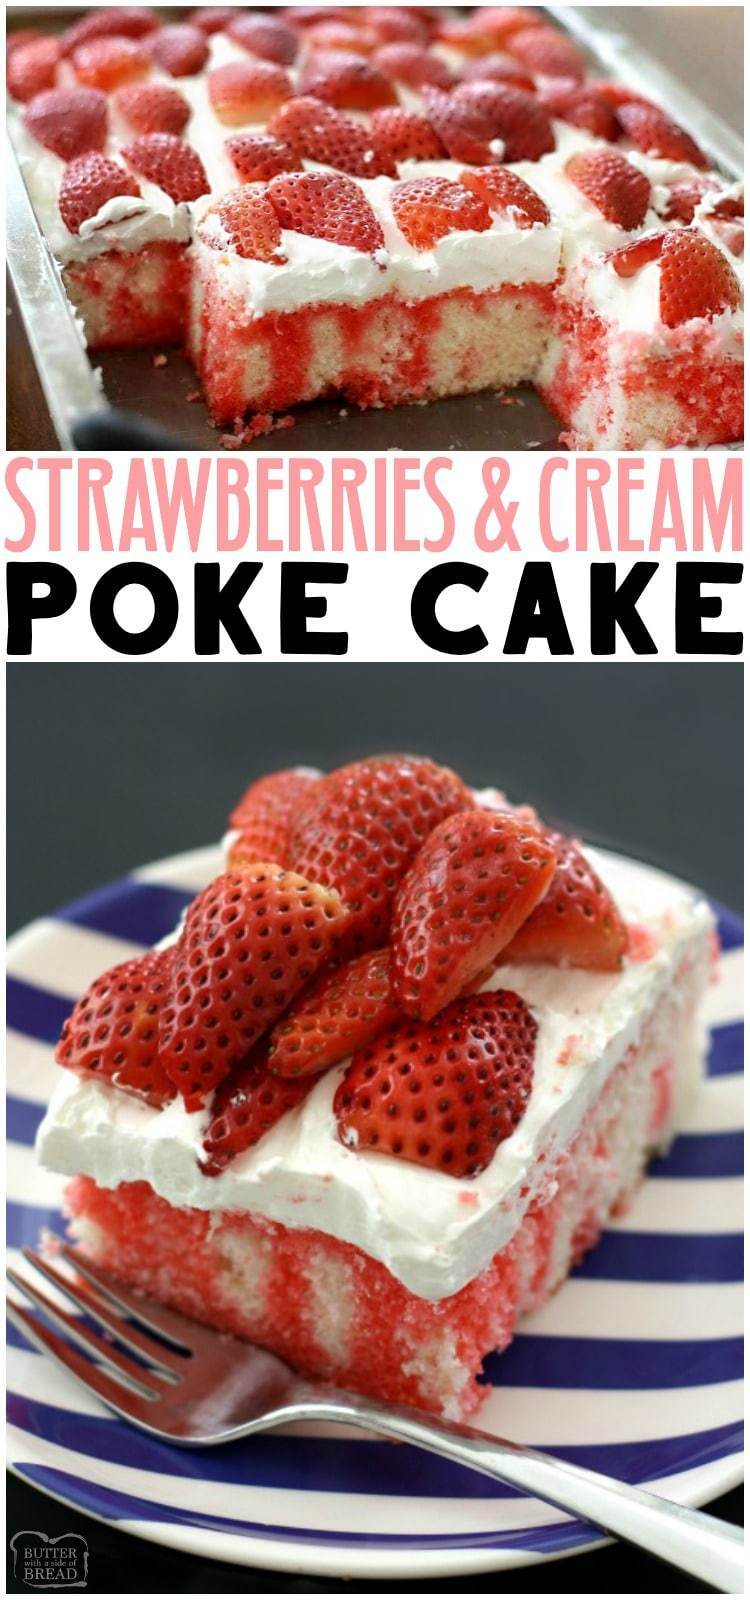 Strawberries & Cream Poke Cake is the perfect light and refreshing jello dessert for any gathering with family and friends - it is delicious and so pretty! #strawberry #strawberriesandcream #pokecake #recipefrom Butter With a Side of Bread